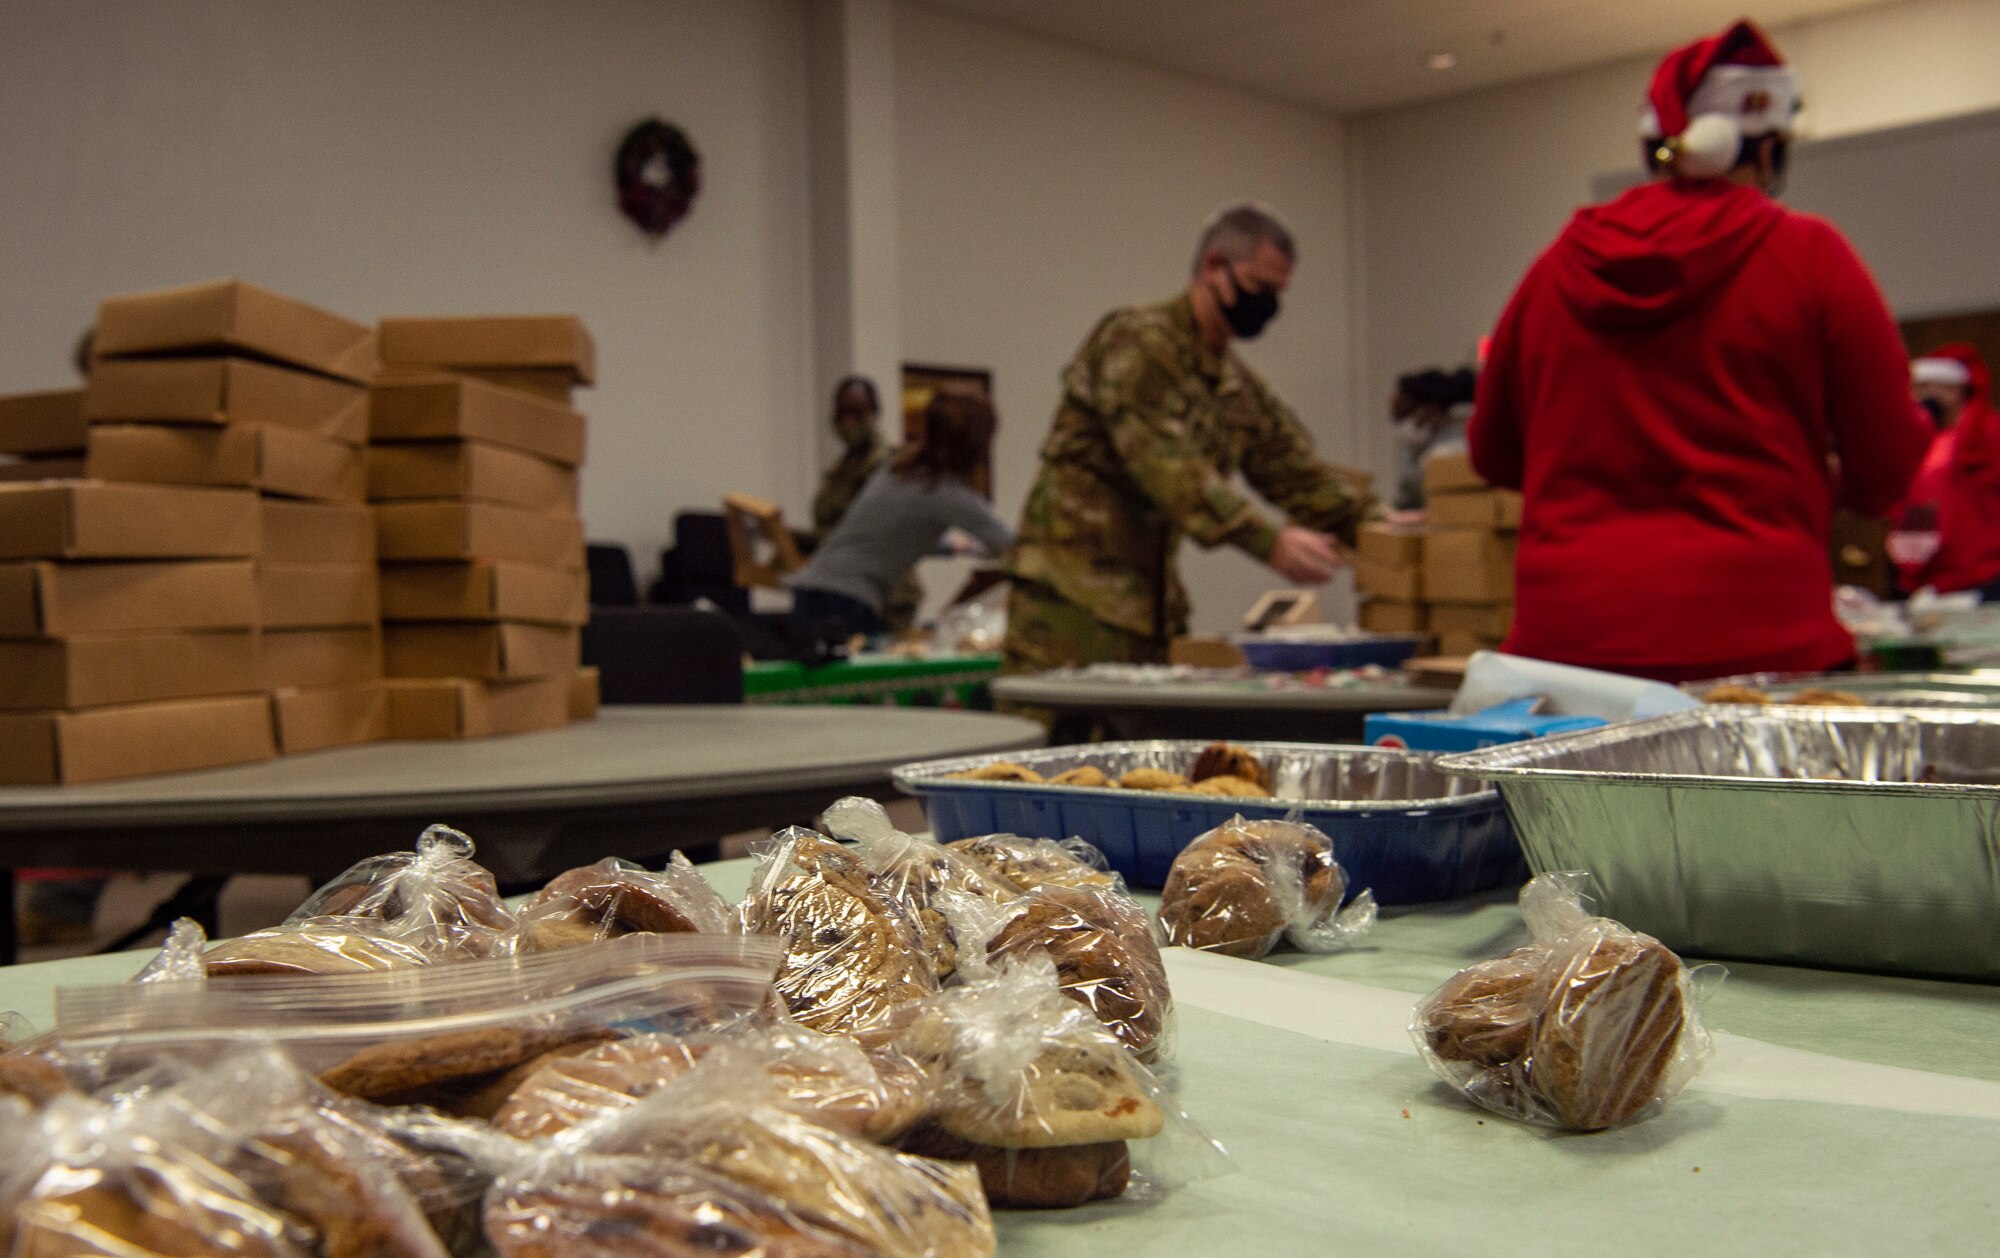 Volunteers box up donated cookies for dorm resident Airmen during Operation Cookie Drop Dec. 9, 2020, at Joint Base Lewis-McChord, Wash. The operation received more than 1,000 dozen cookies for the dorm Airmen. (U.S. Air Force photo by Senior Airman Tryphena Mayhugh)